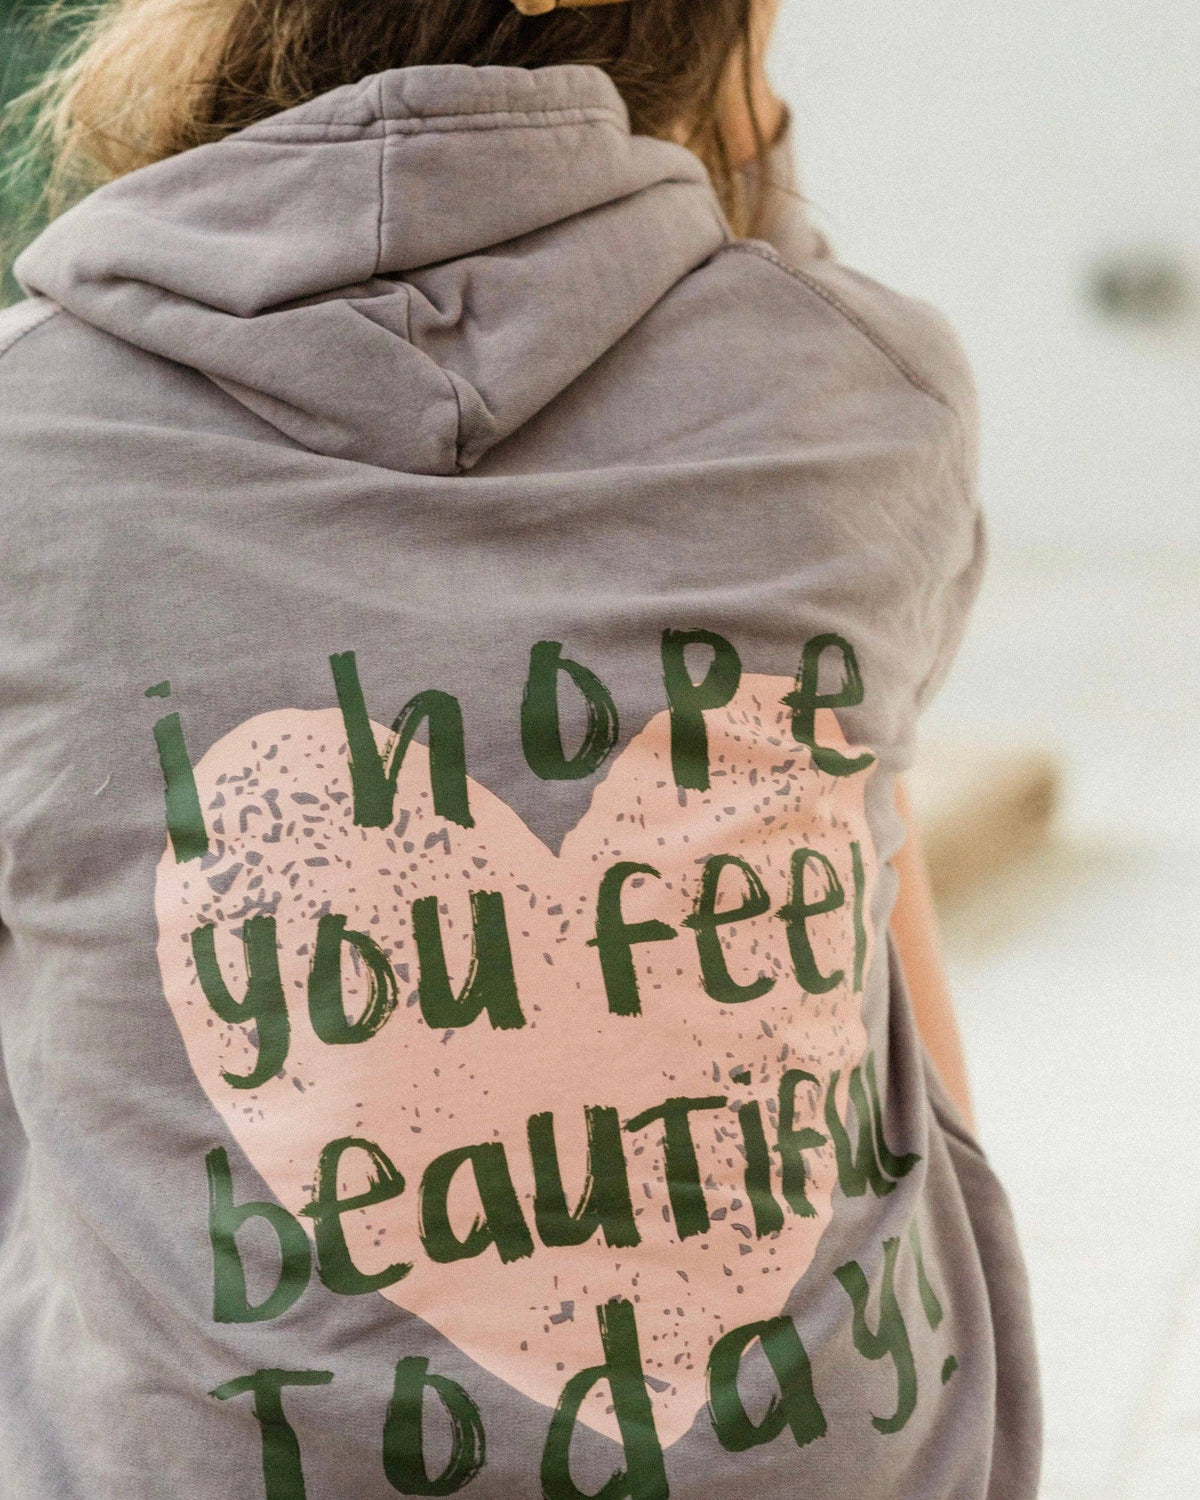 I Hope You Feel Beautiful Today Hoodie Positive Message Hoodie: Grey Mineral Wash